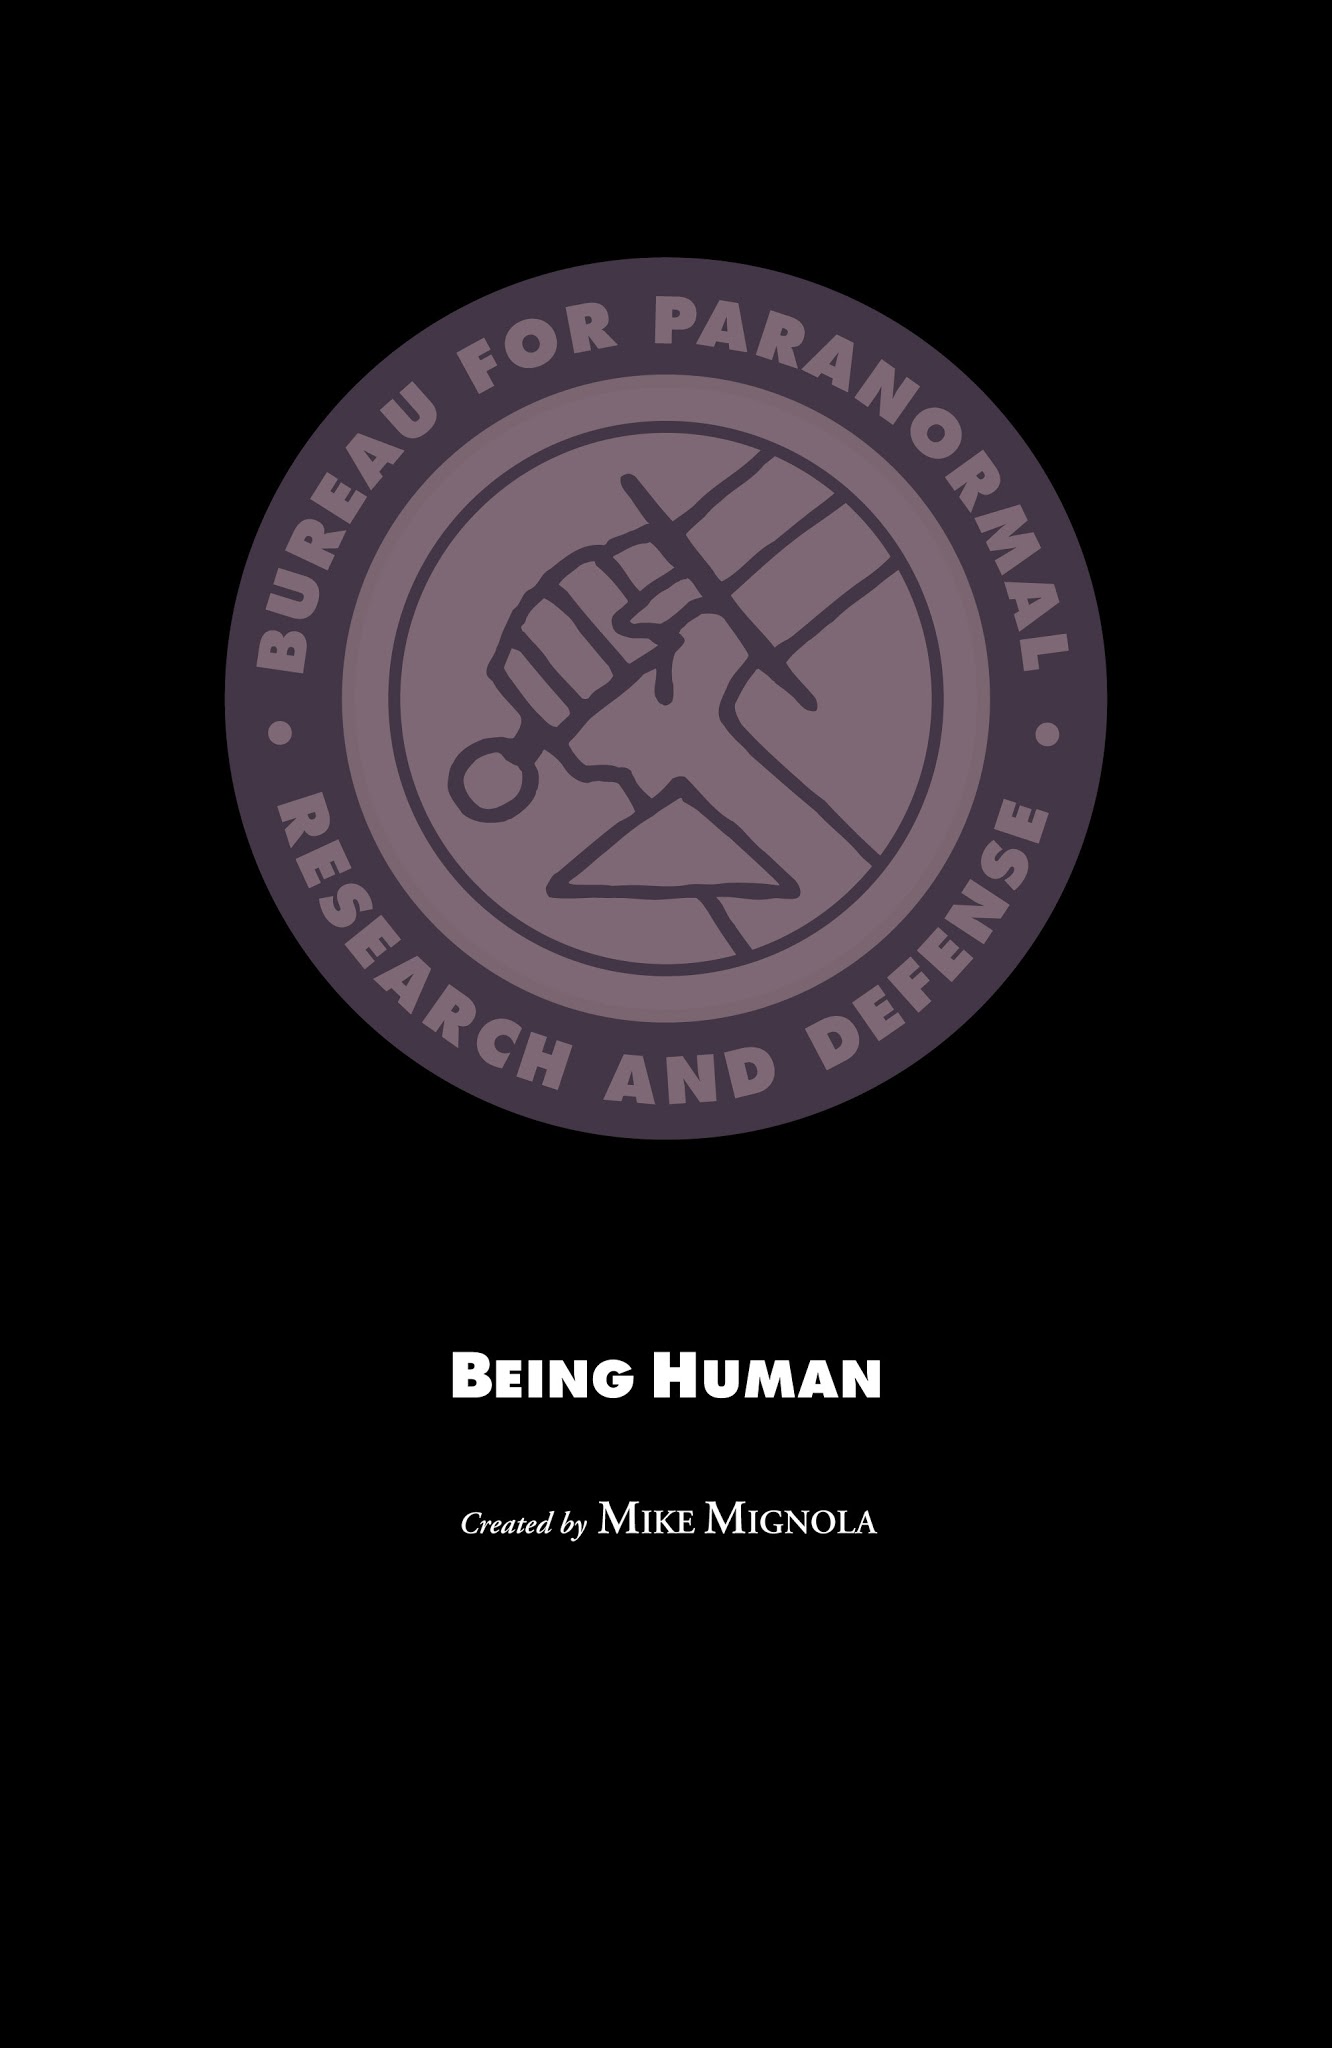 Read online B.P.R.D.: Being Human comic -  Issue # TPB - 3